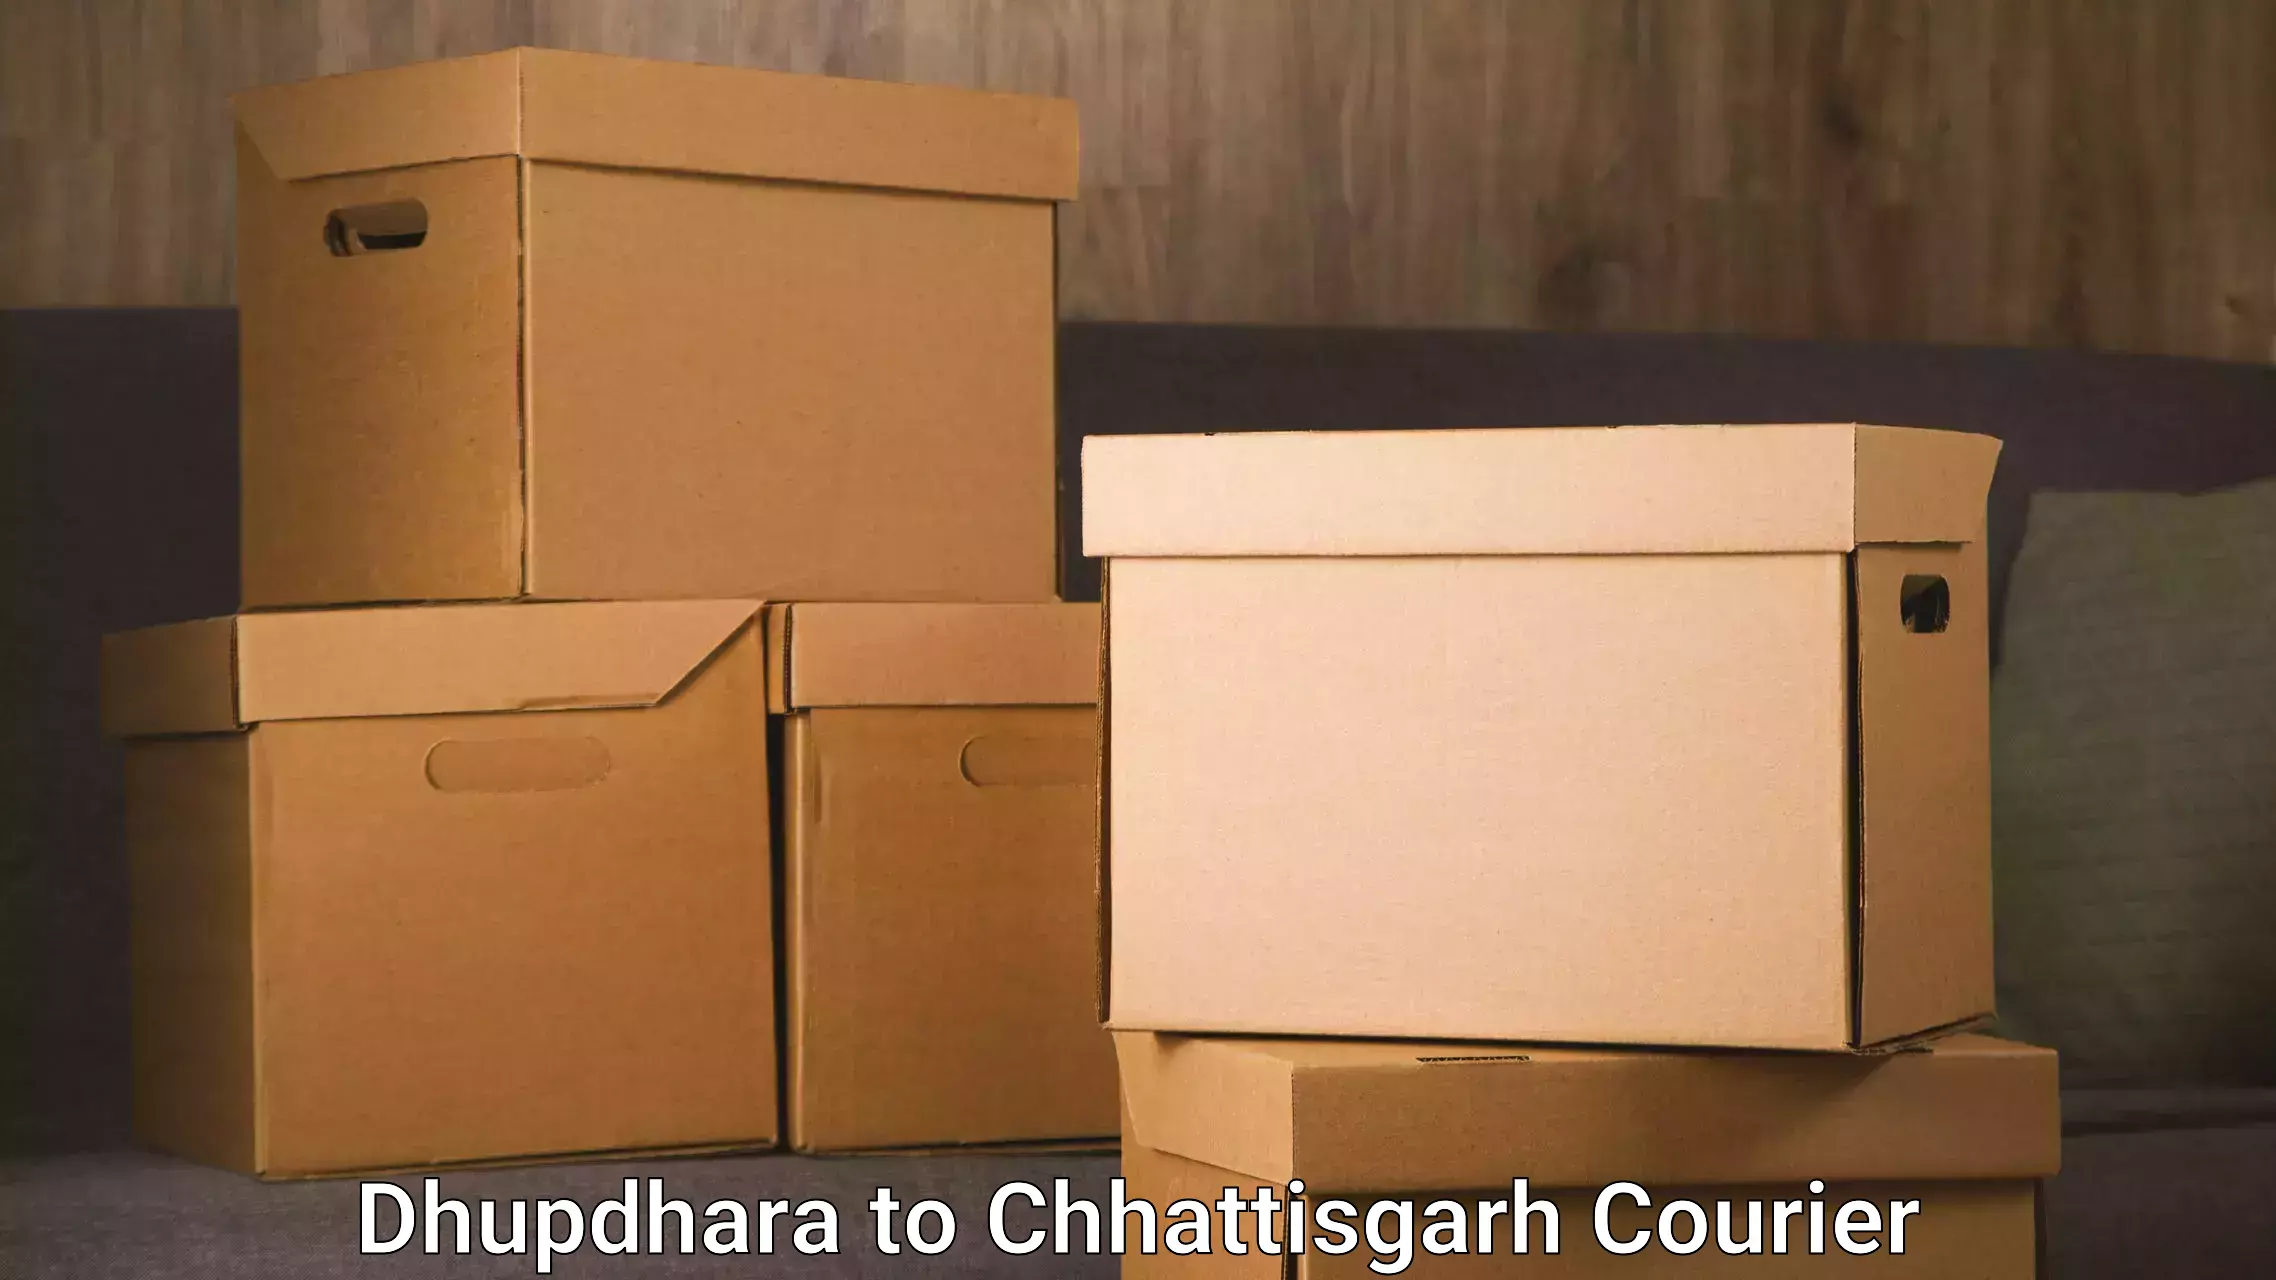 Courier service comparison Dhupdhara to bagbahra